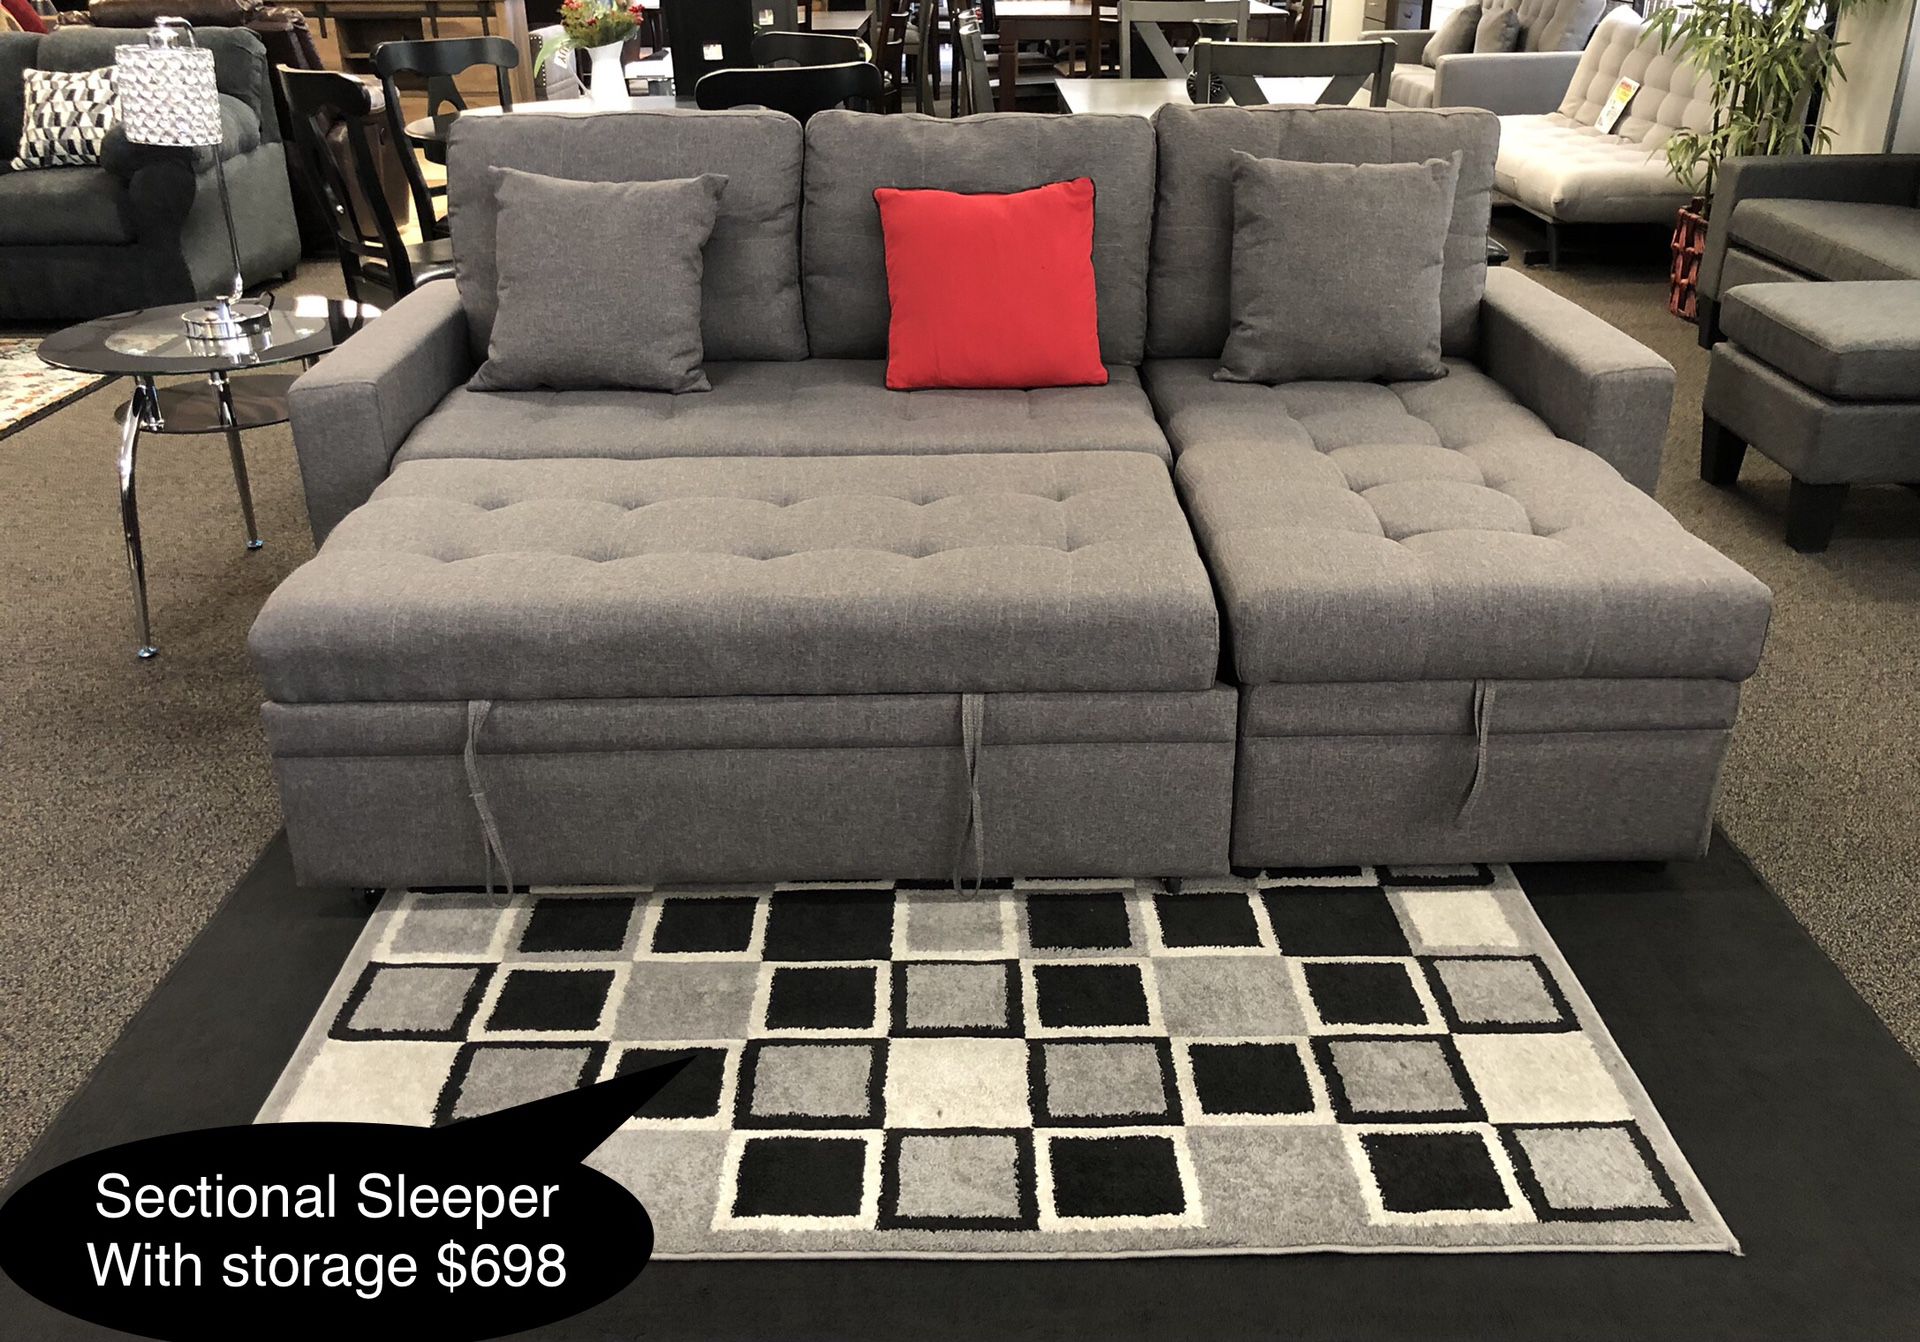 New Sectional Sleeper With Storage - FREE DELIVERY 